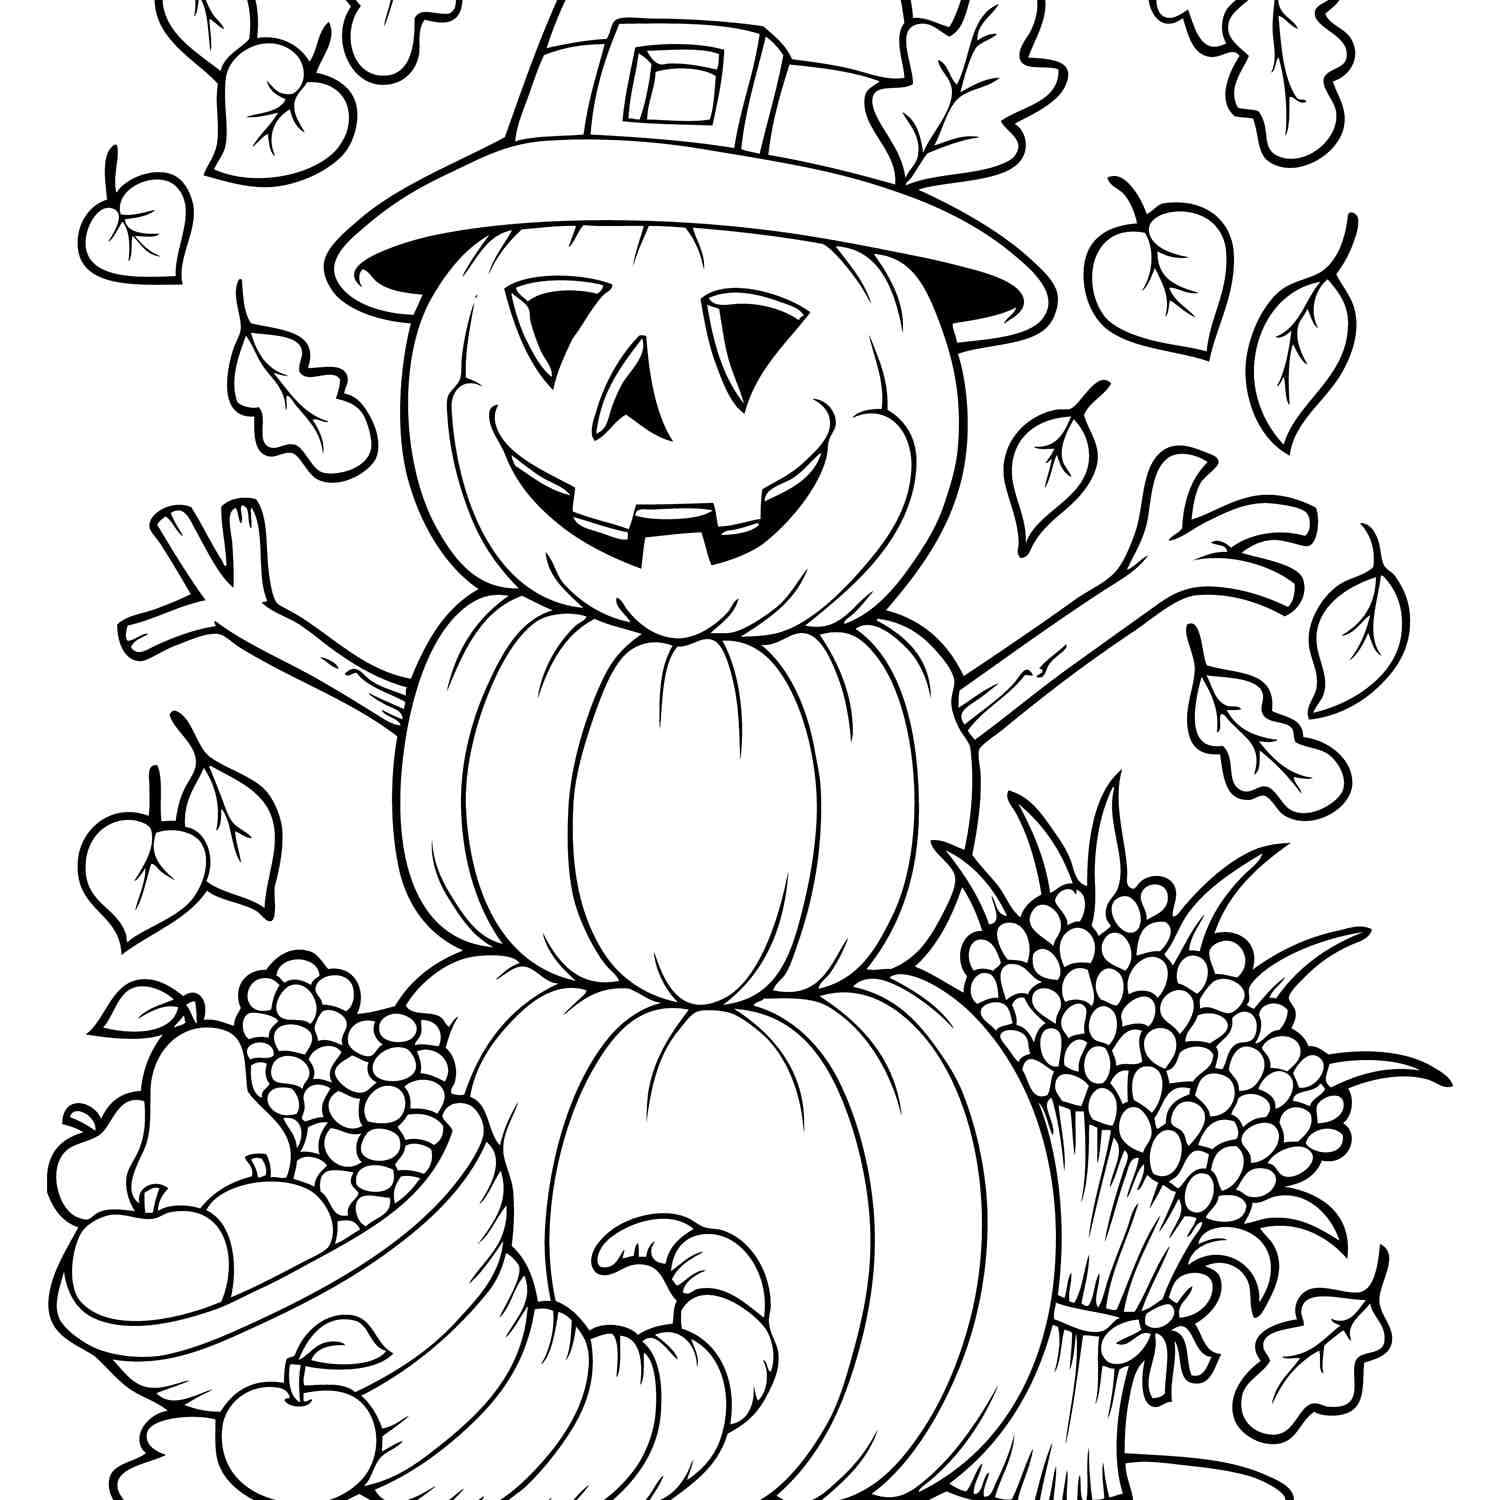 Raskrasil.com-Coloring-Pages-Halloween-for-adults-97